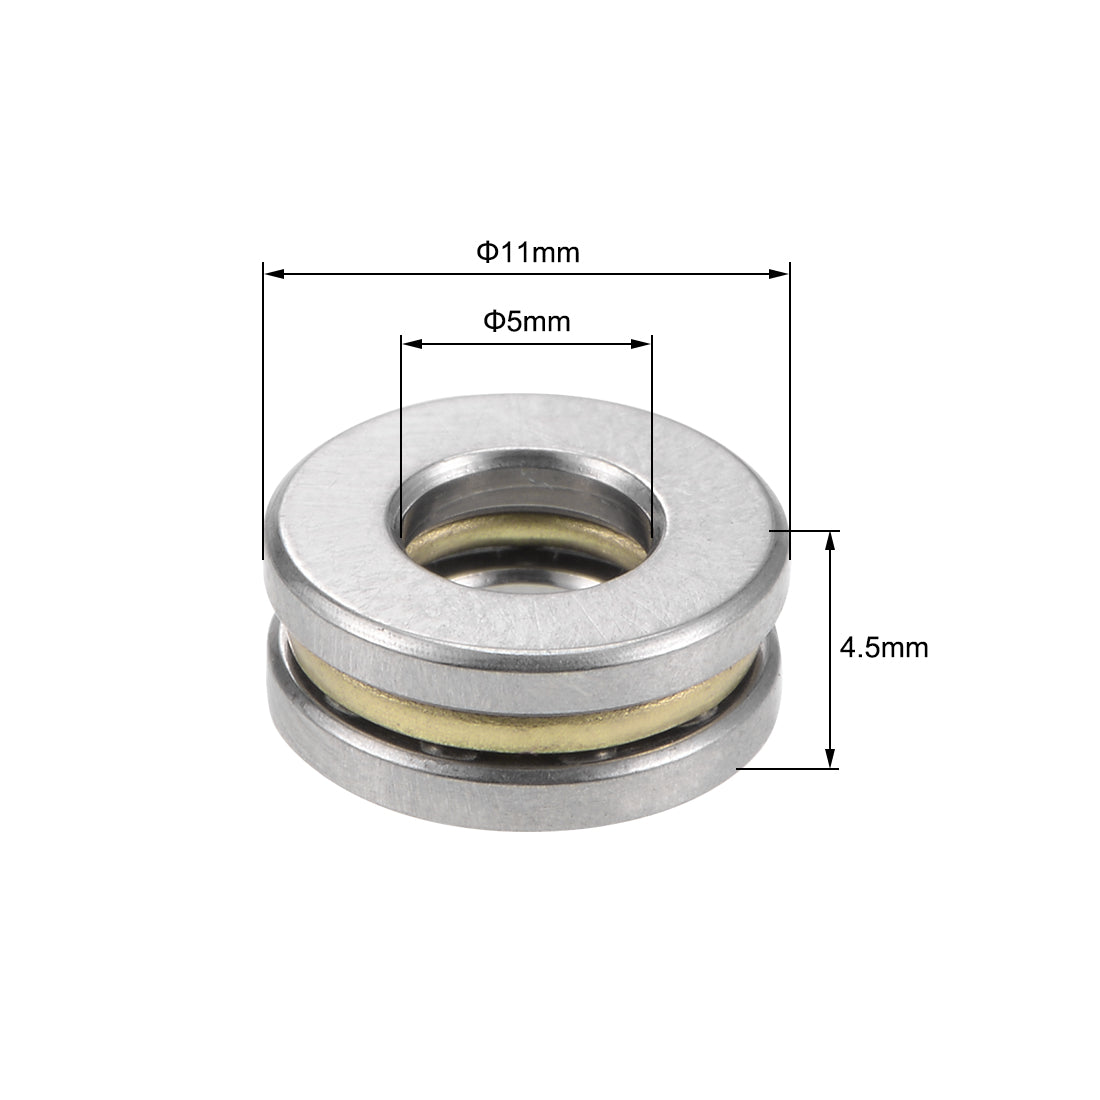 uxcell Uxcell F5-11M Miniature Thrust Ball Bearing 5x11x4.5mm Chrome Steel with Washer 2Pcs